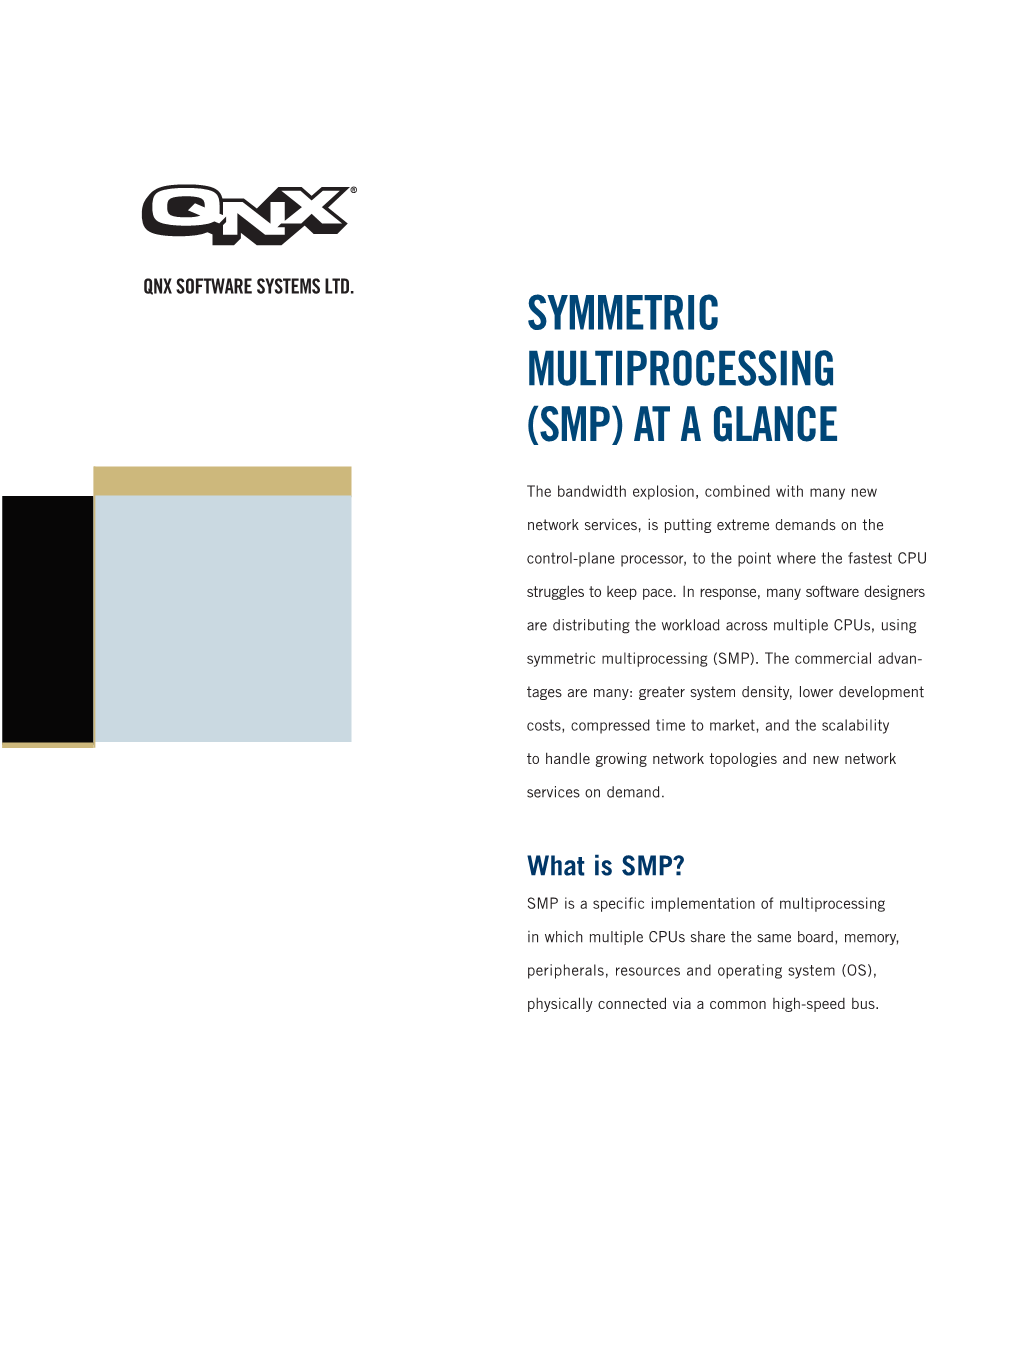 Symmetric Multiprocessing (Smp) at a Glance